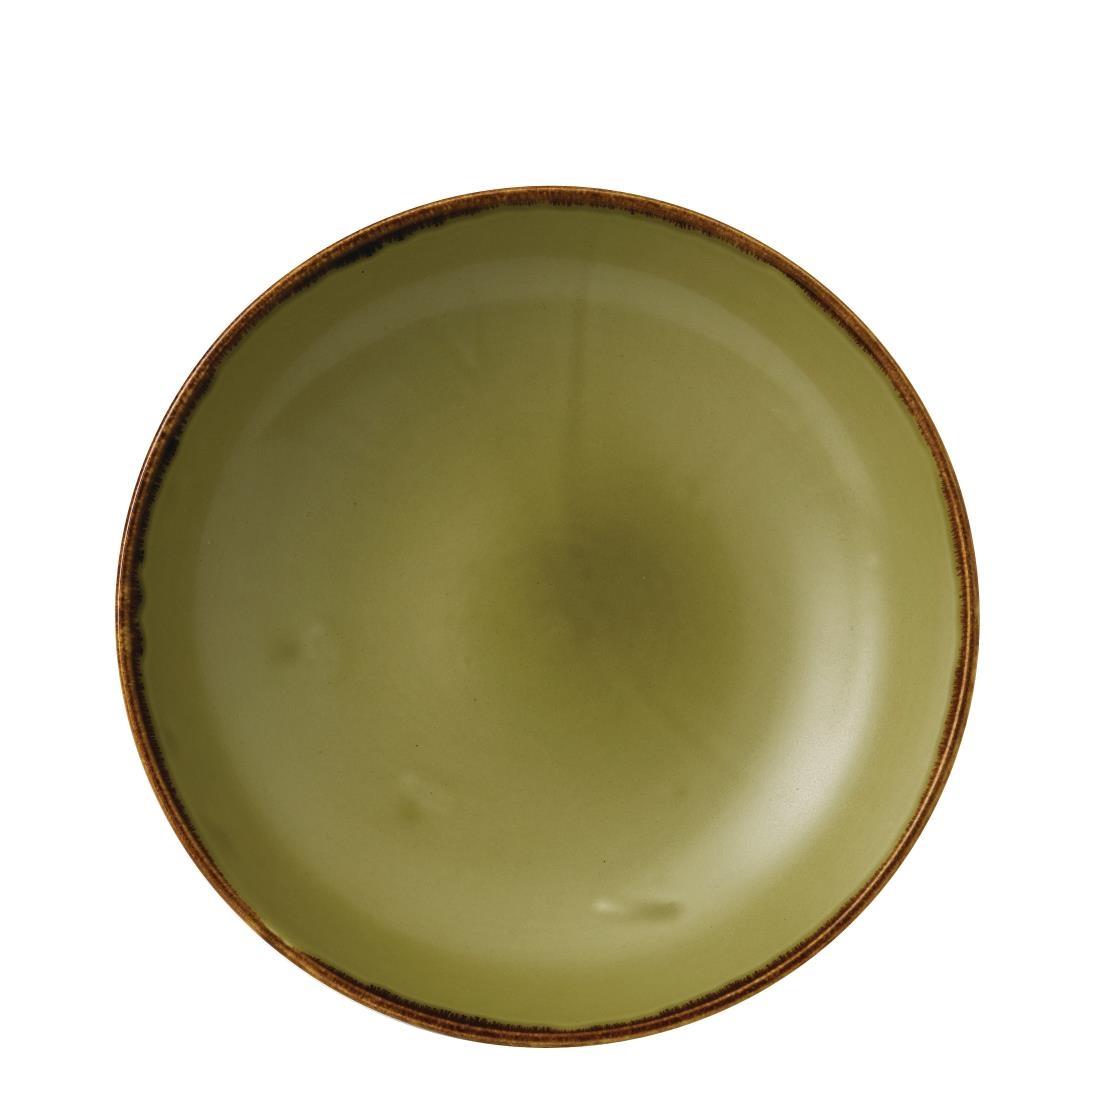 Dudson Harvest Evolve Coupe Bowls Green 248mm (Pack of 12) - FC044  - 1